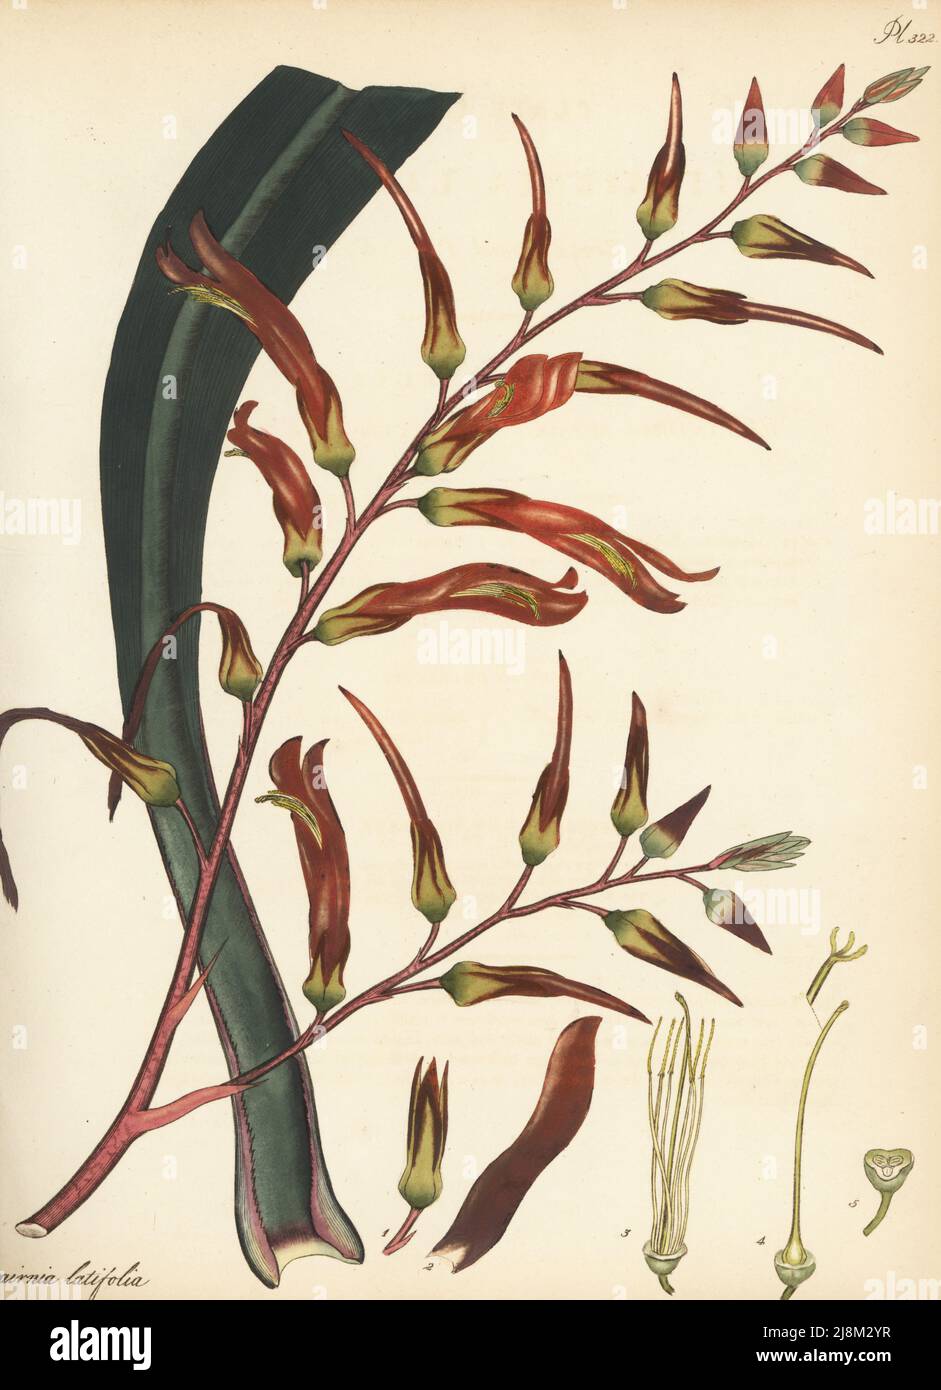 Pitcairnia bifrons Broad-leaved pitcairnia, Pitcairnia latifolia. Native to Guadeloupe and St. Kitts, West Indies, in the James Vere herbarium collection, Kensington Gore. Copperplate engraving drawn, engraved and hand-coloured by Henry Andrews from his Botanical Register, Volume 5, self-published in Knightsbridge, London, 1803. Stock Photo